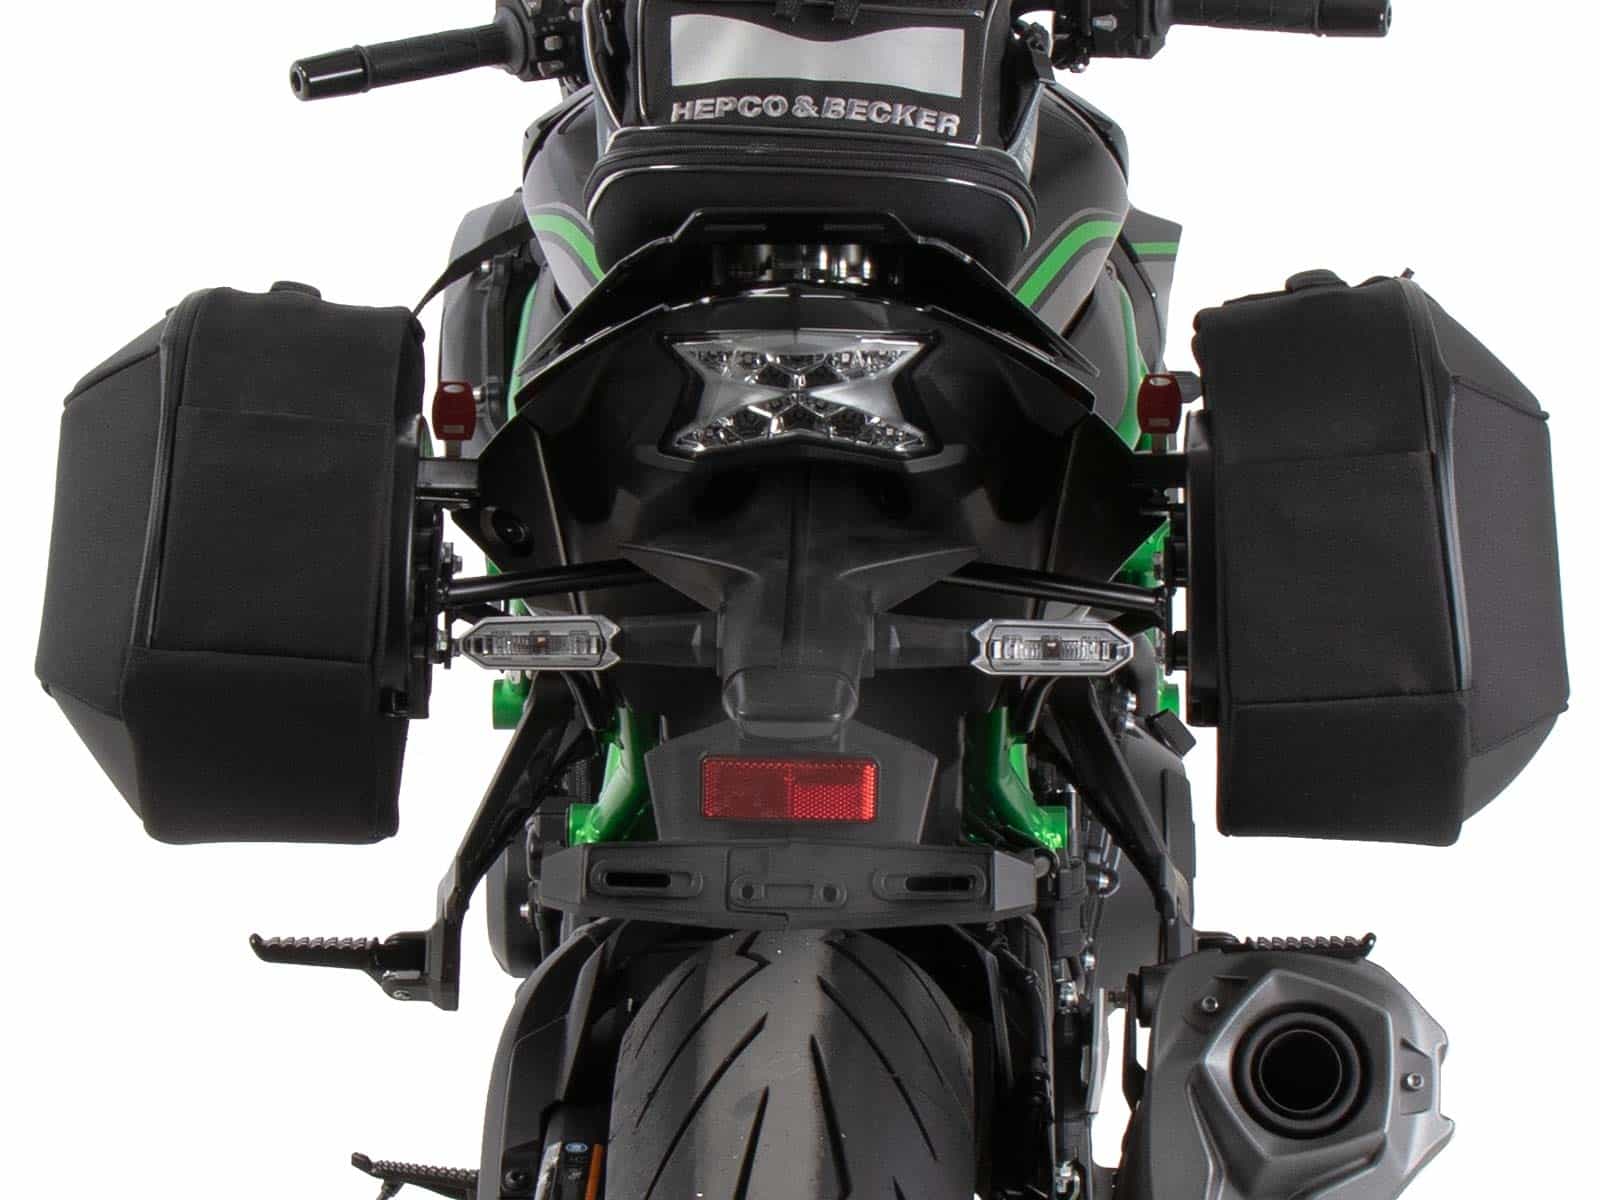 C-Bow sidecarrier for Kawasaki Z H2 (2020-)